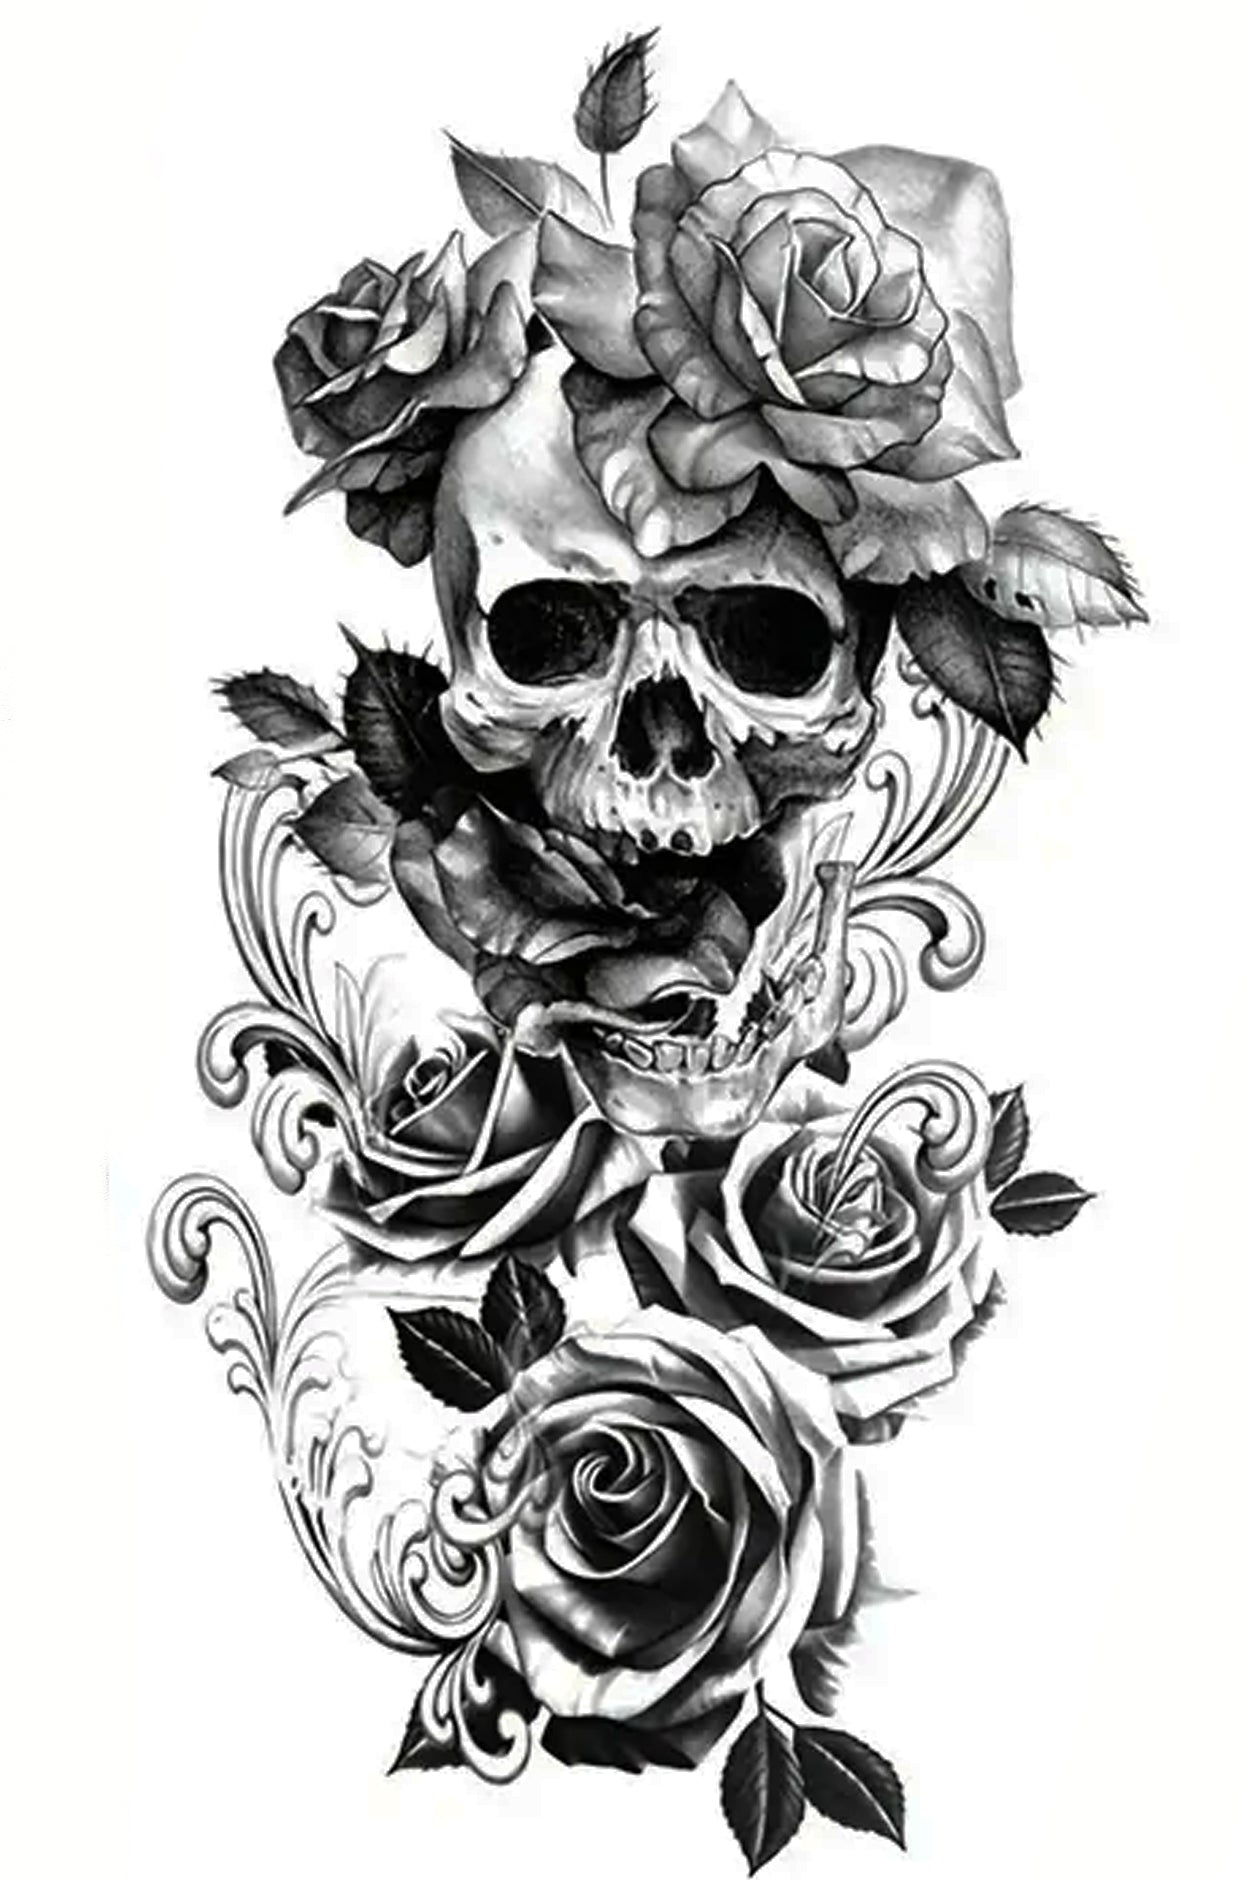 This tattoo of a smiling skull surrounded by full roses and fleur de lis scrolls celebrates death and the afterlife rather than real life. The skull’s former owner celebrates his life with roses, the ultimate symbol of spirituality, purity, and innocence, a perfect tat for an arm or any body part.